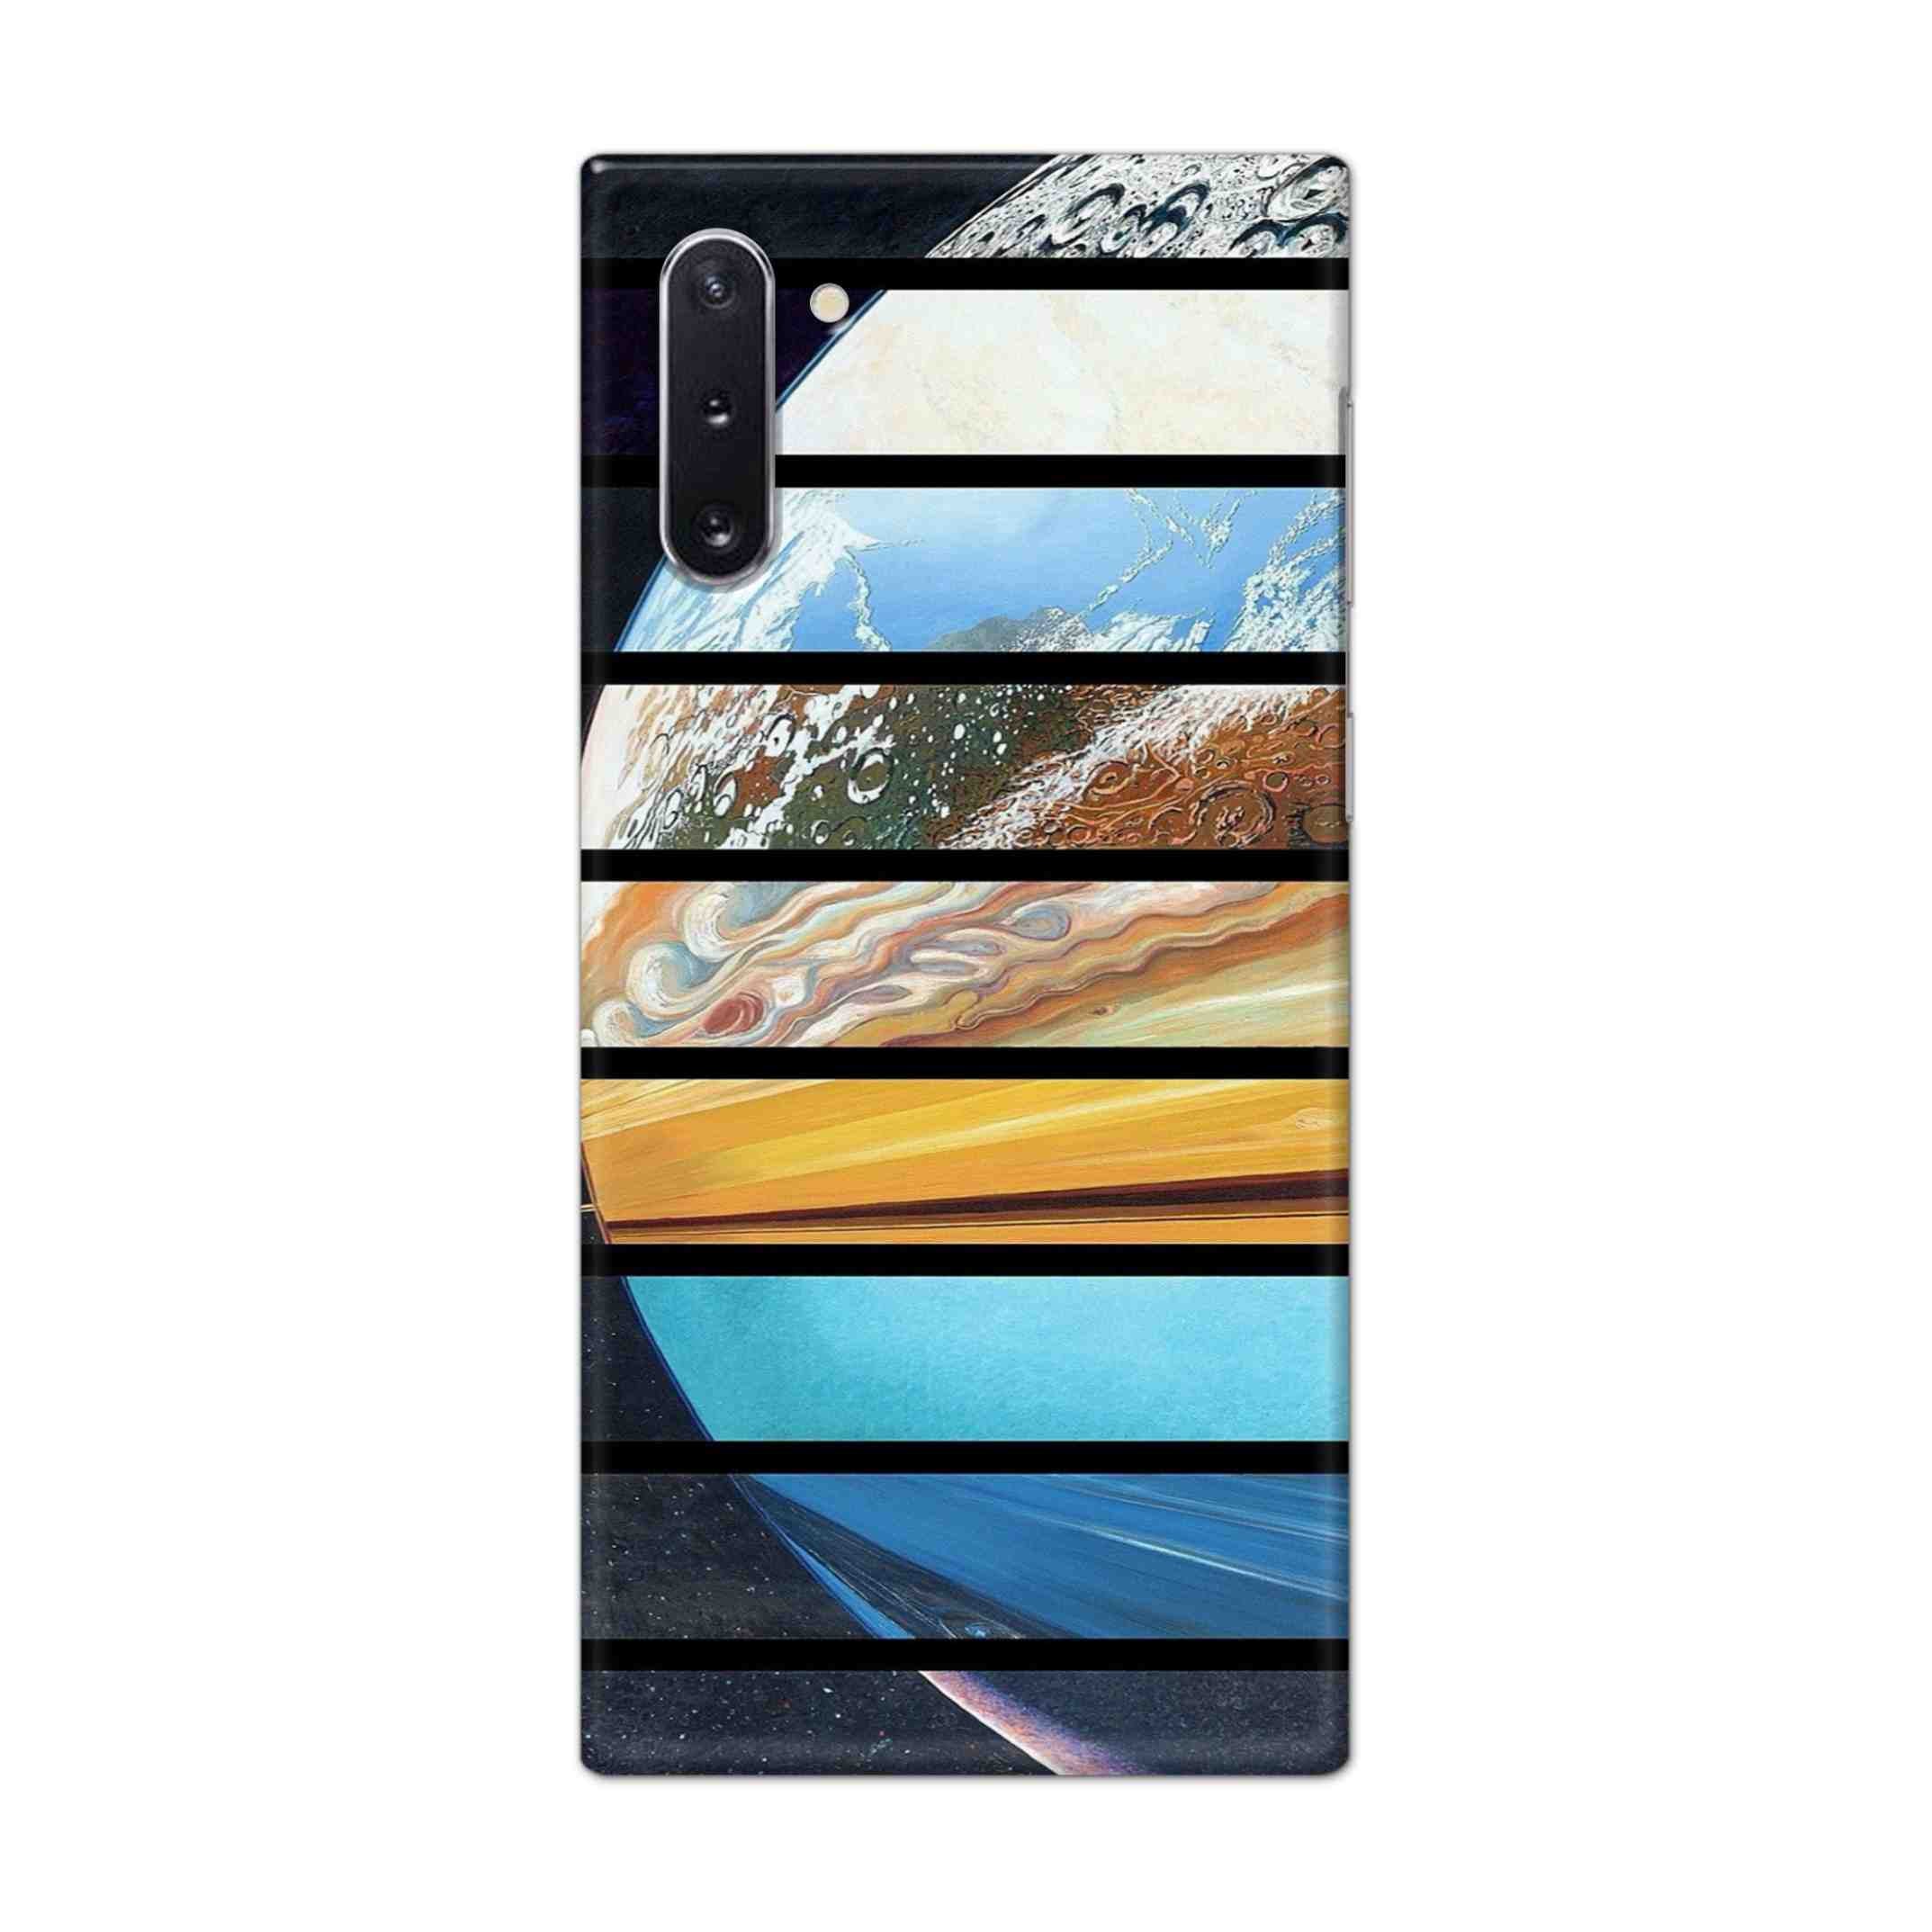 Buy Colourful Earth Hard Back Mobile Phone Case Cover For Samsung Galaxy Note 10 Online